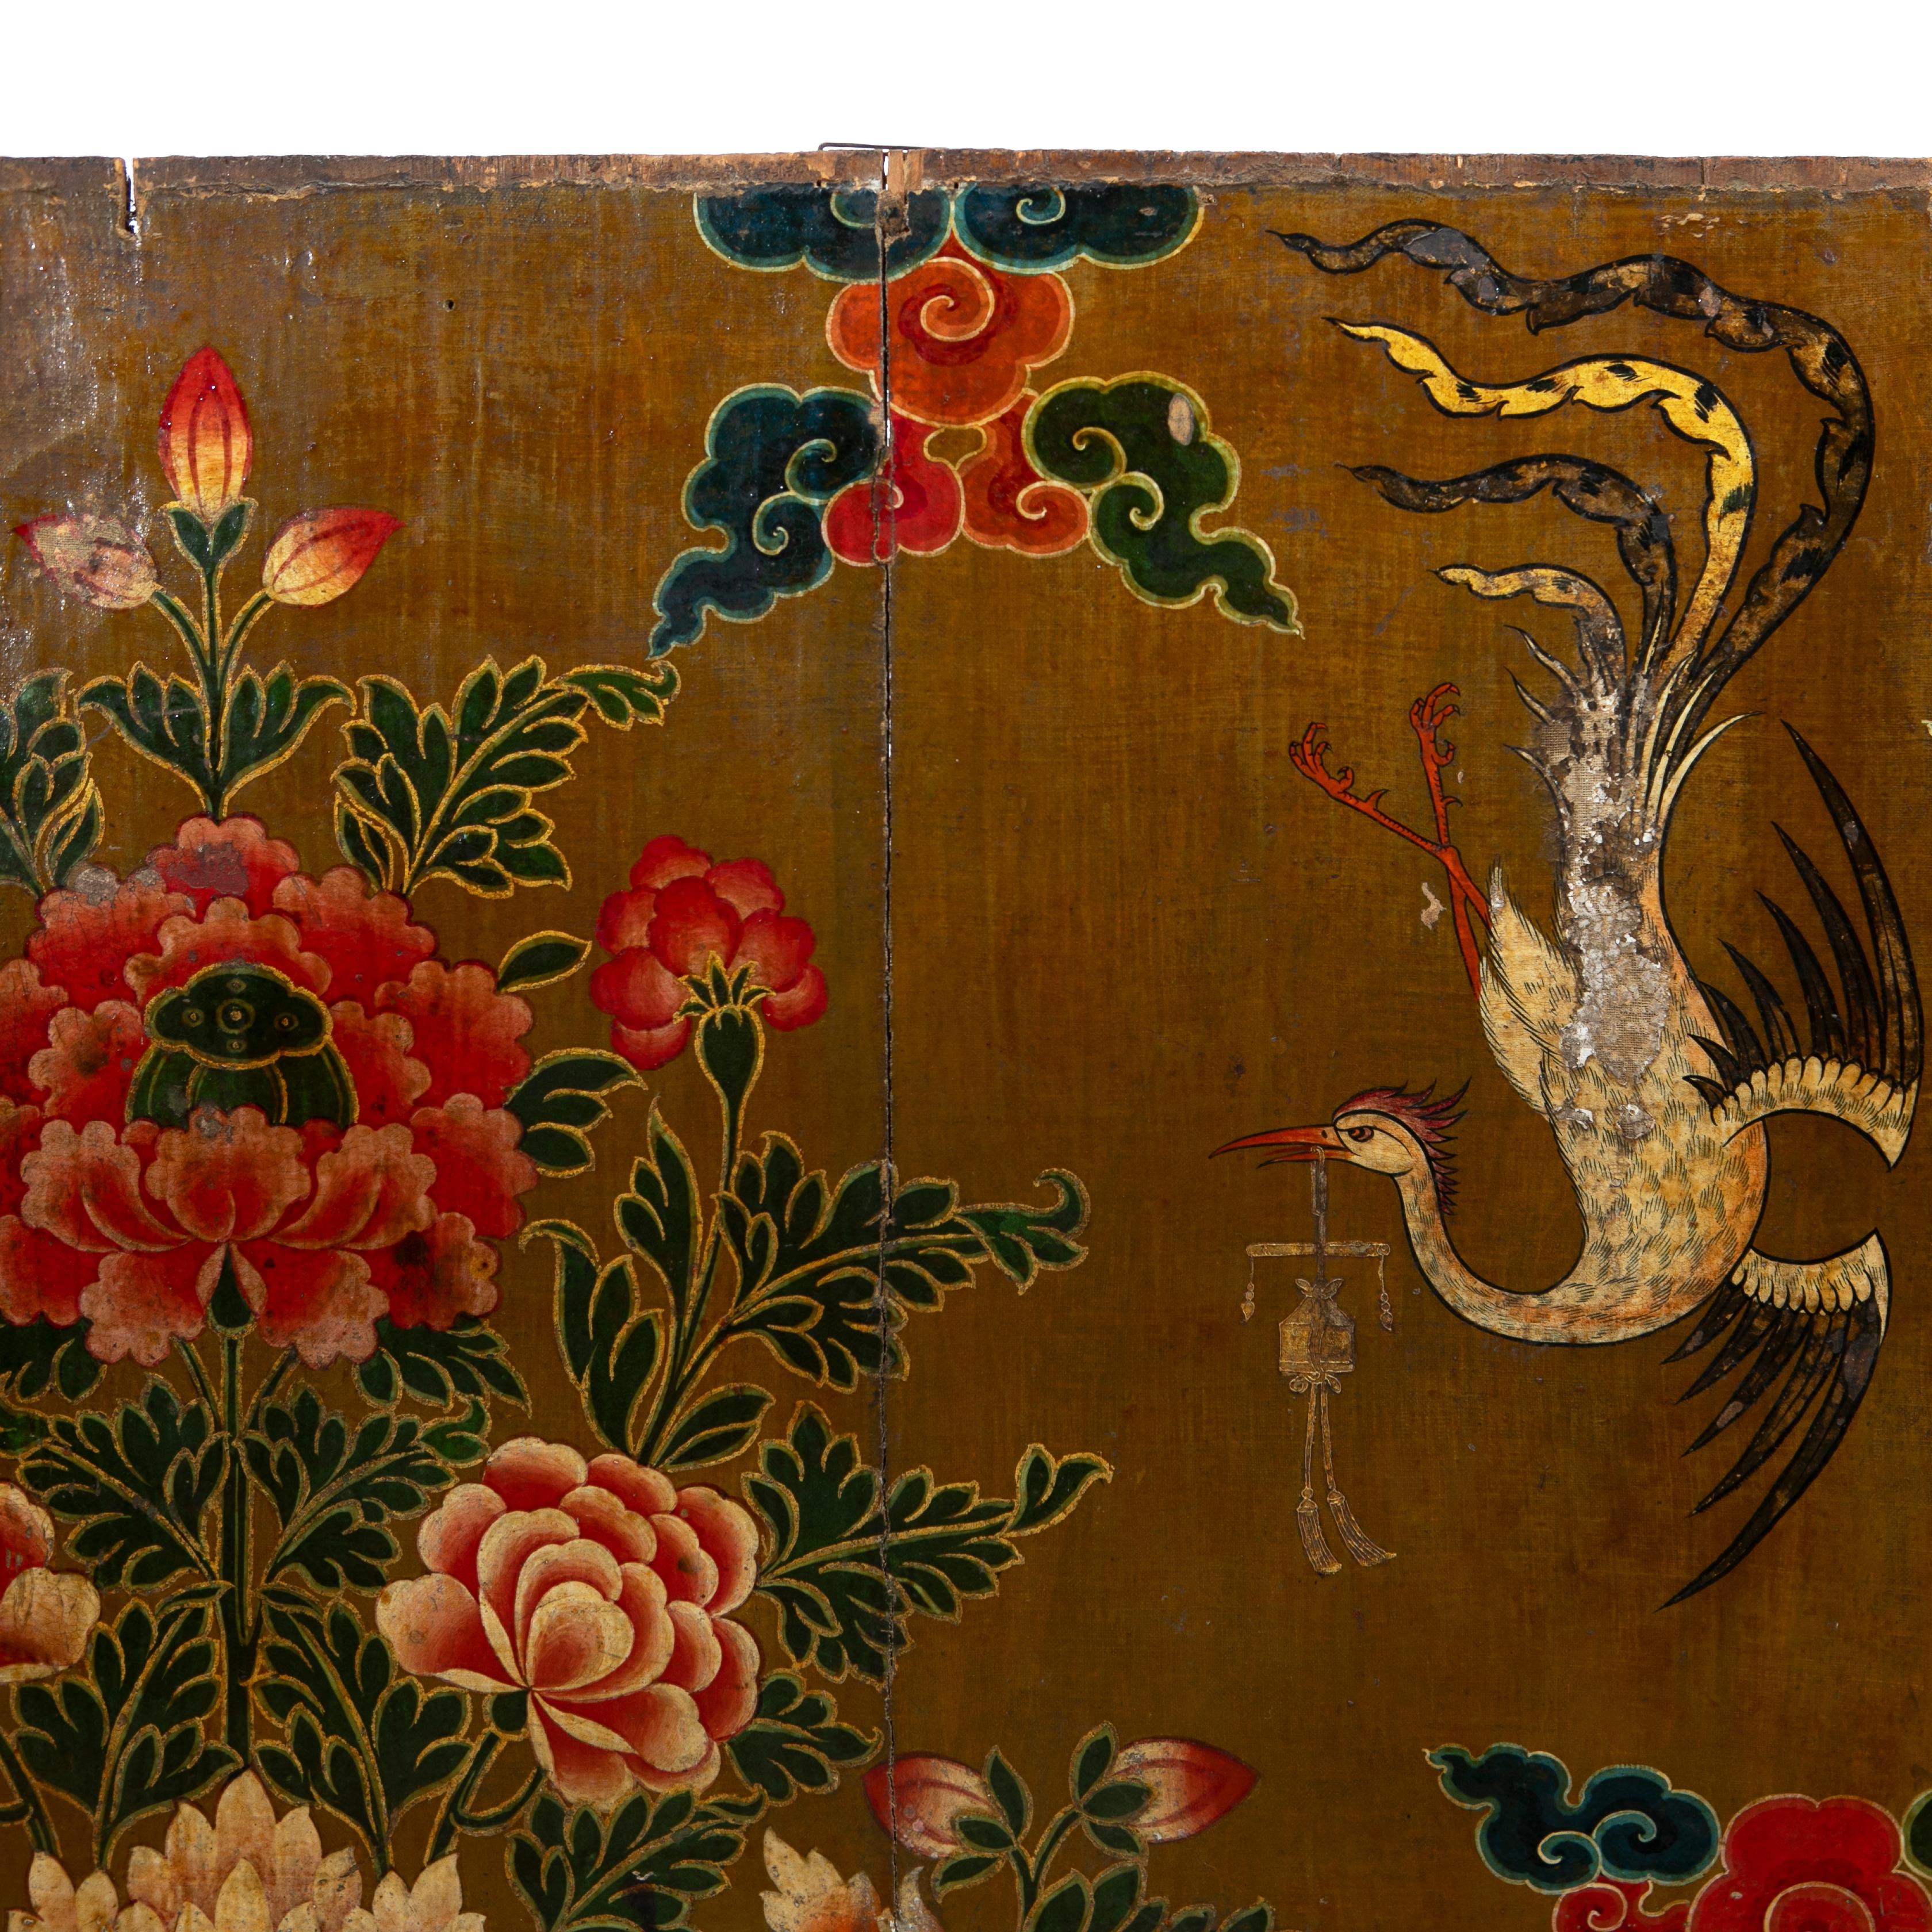 Hand-Painted Rare antique Ming Dynasty Period Painting With Flowers For Sale